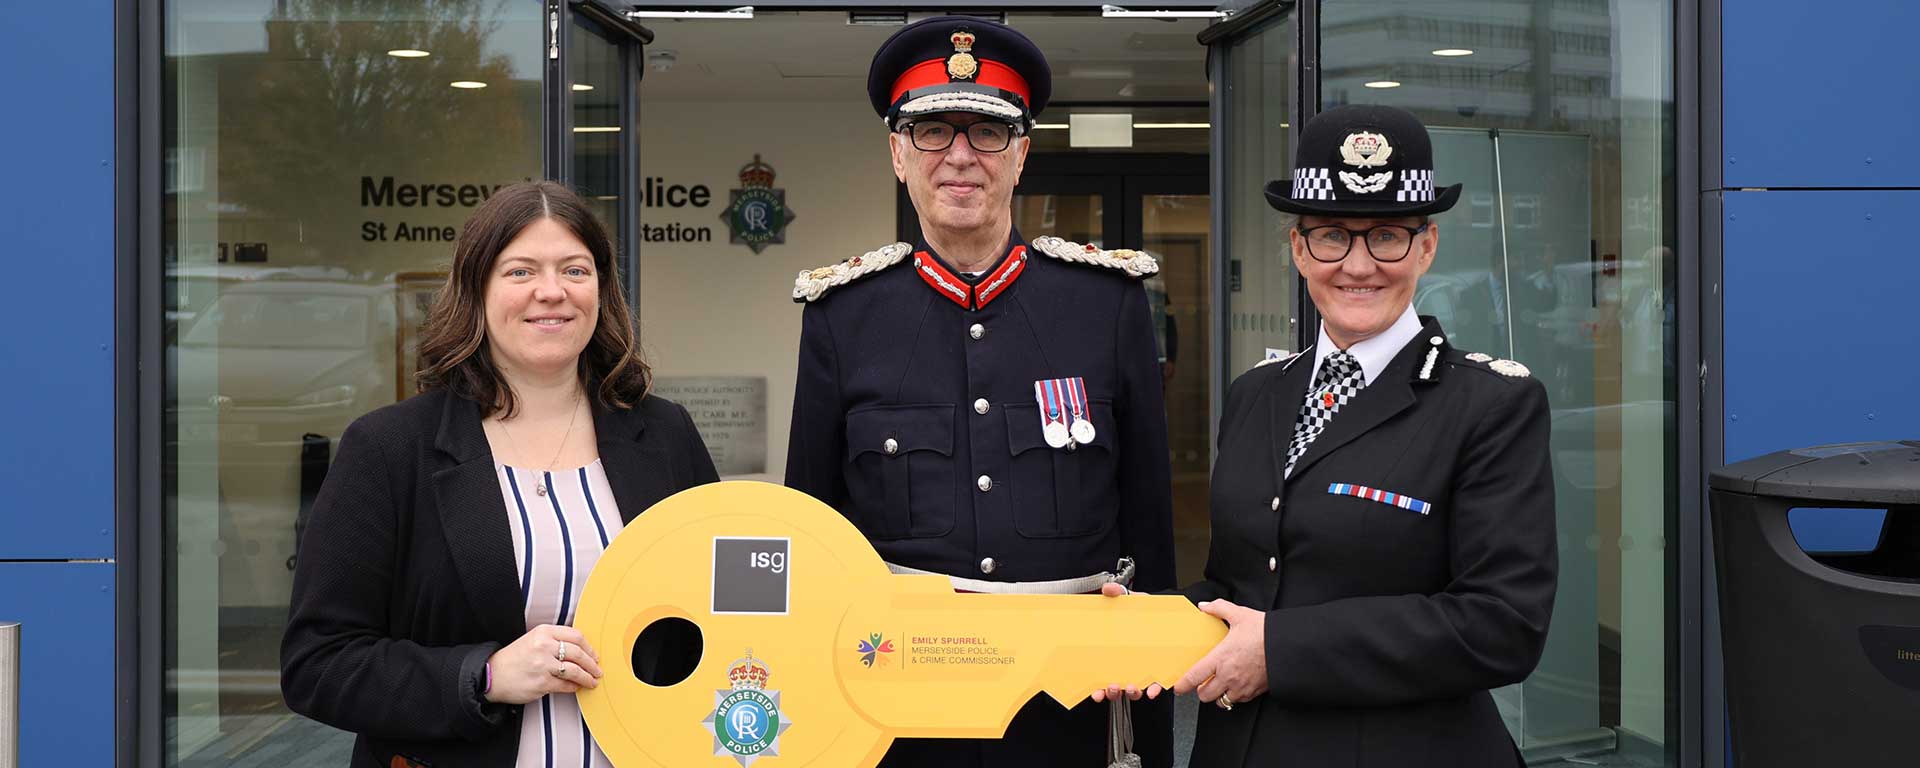 St-Annes-Street-Police-Station-opening-handover-client